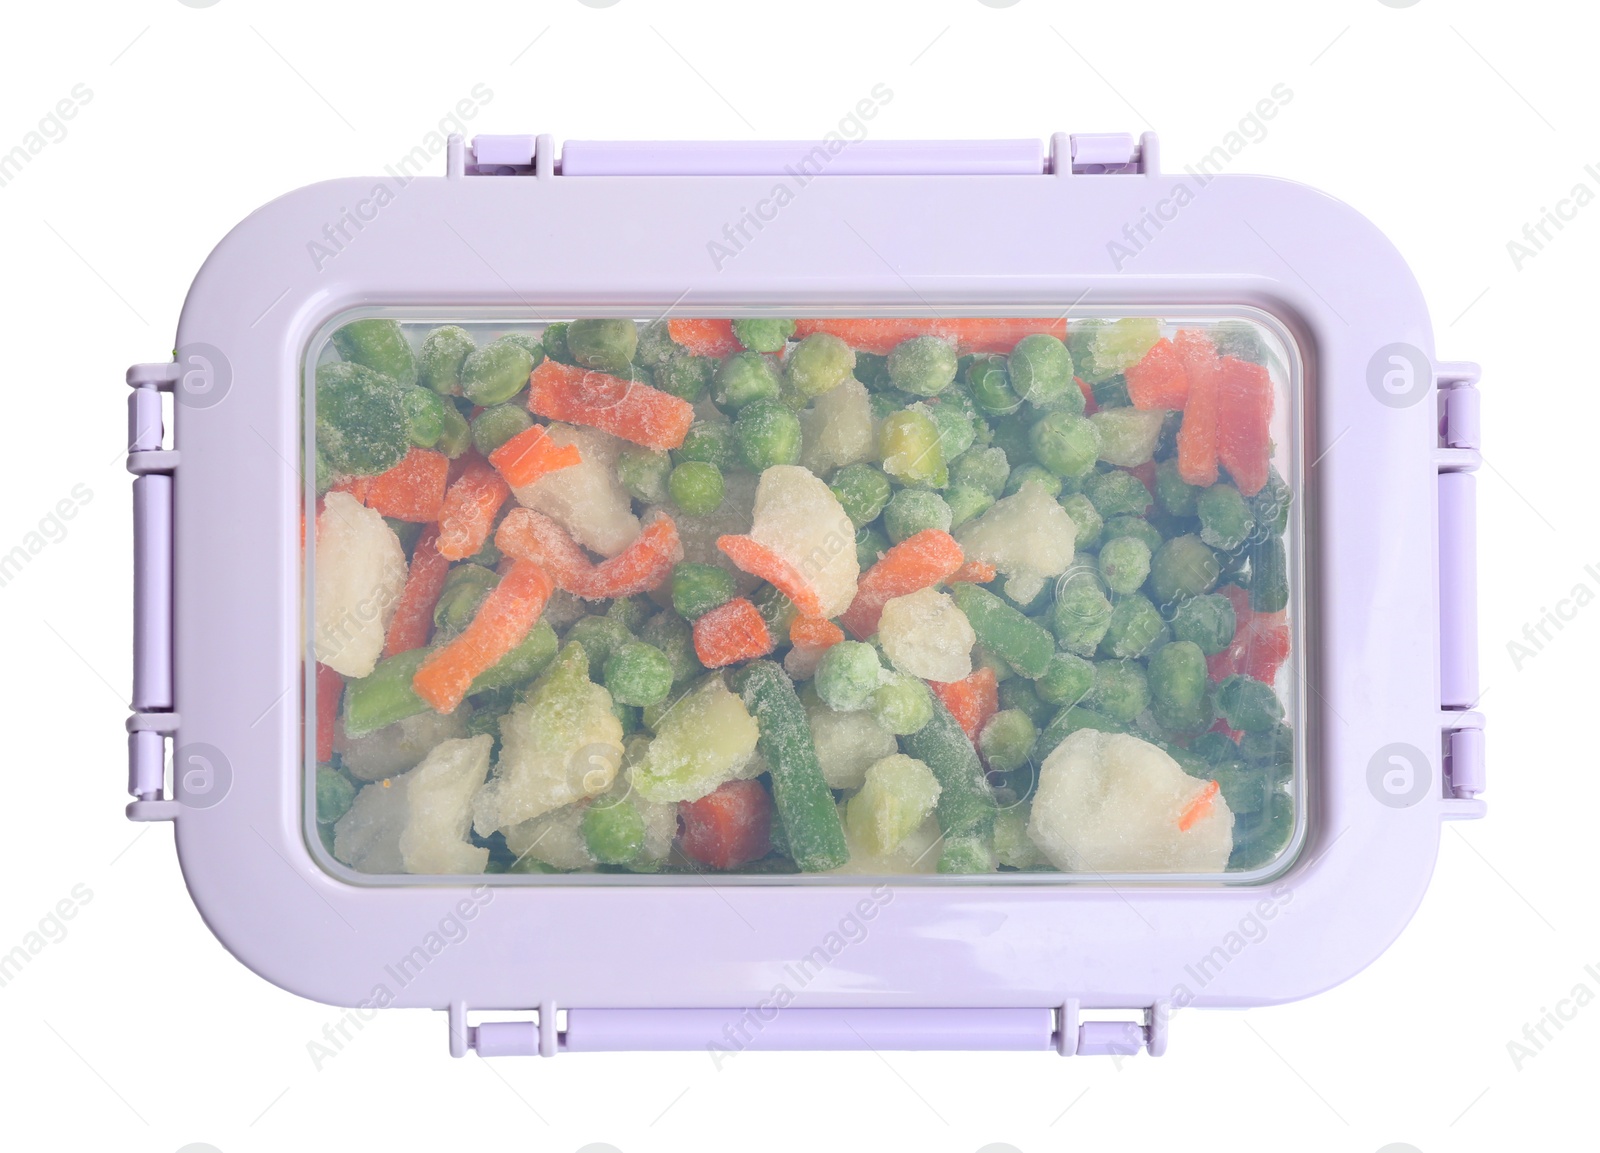 Photo of Frozen vegetables in plastic container isolated on white, top view